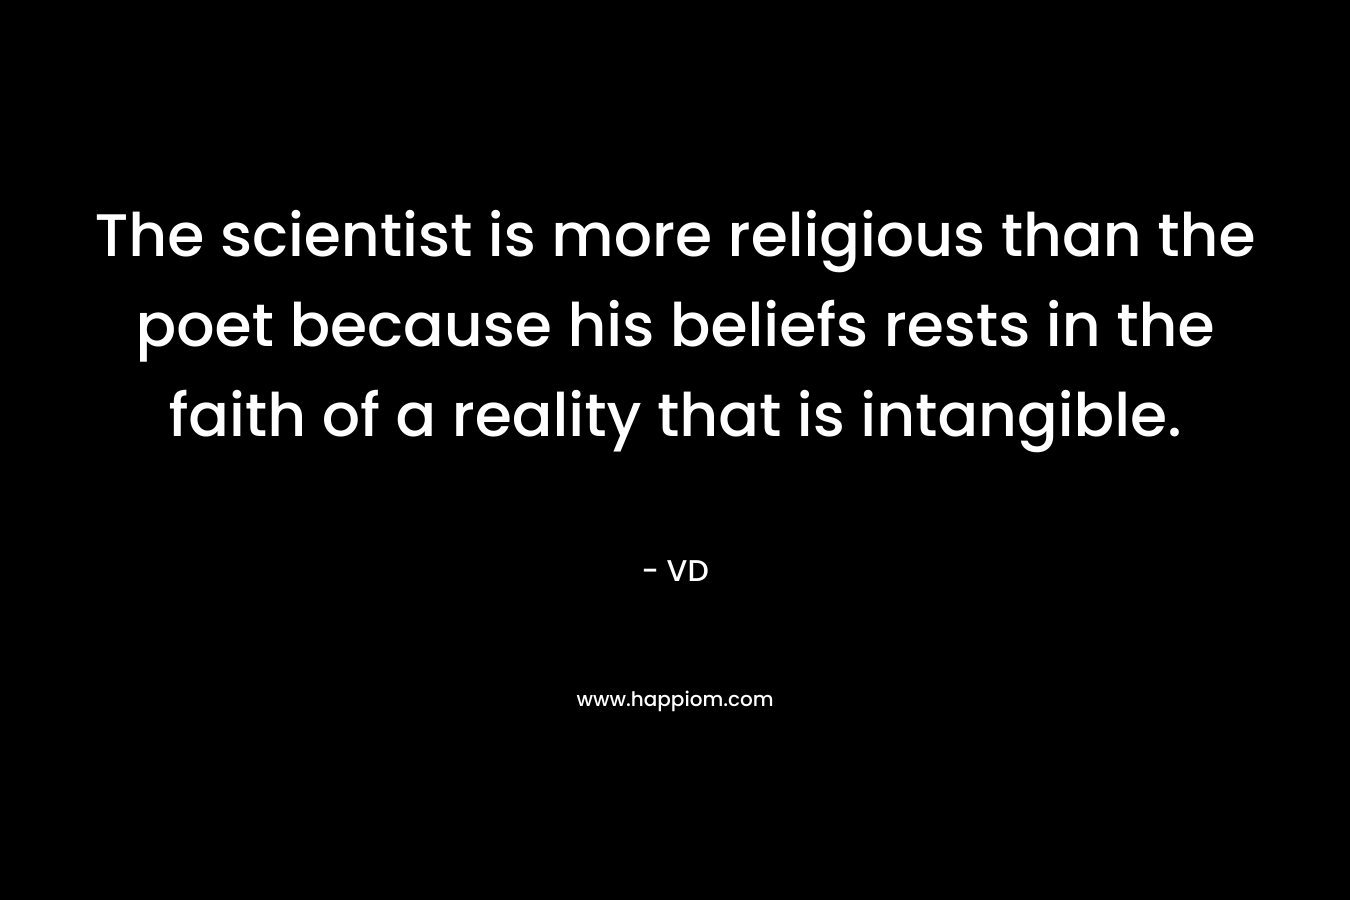 The scientist is more religious than the poet because his beliefs rests in the faith of a reality that is intangible.